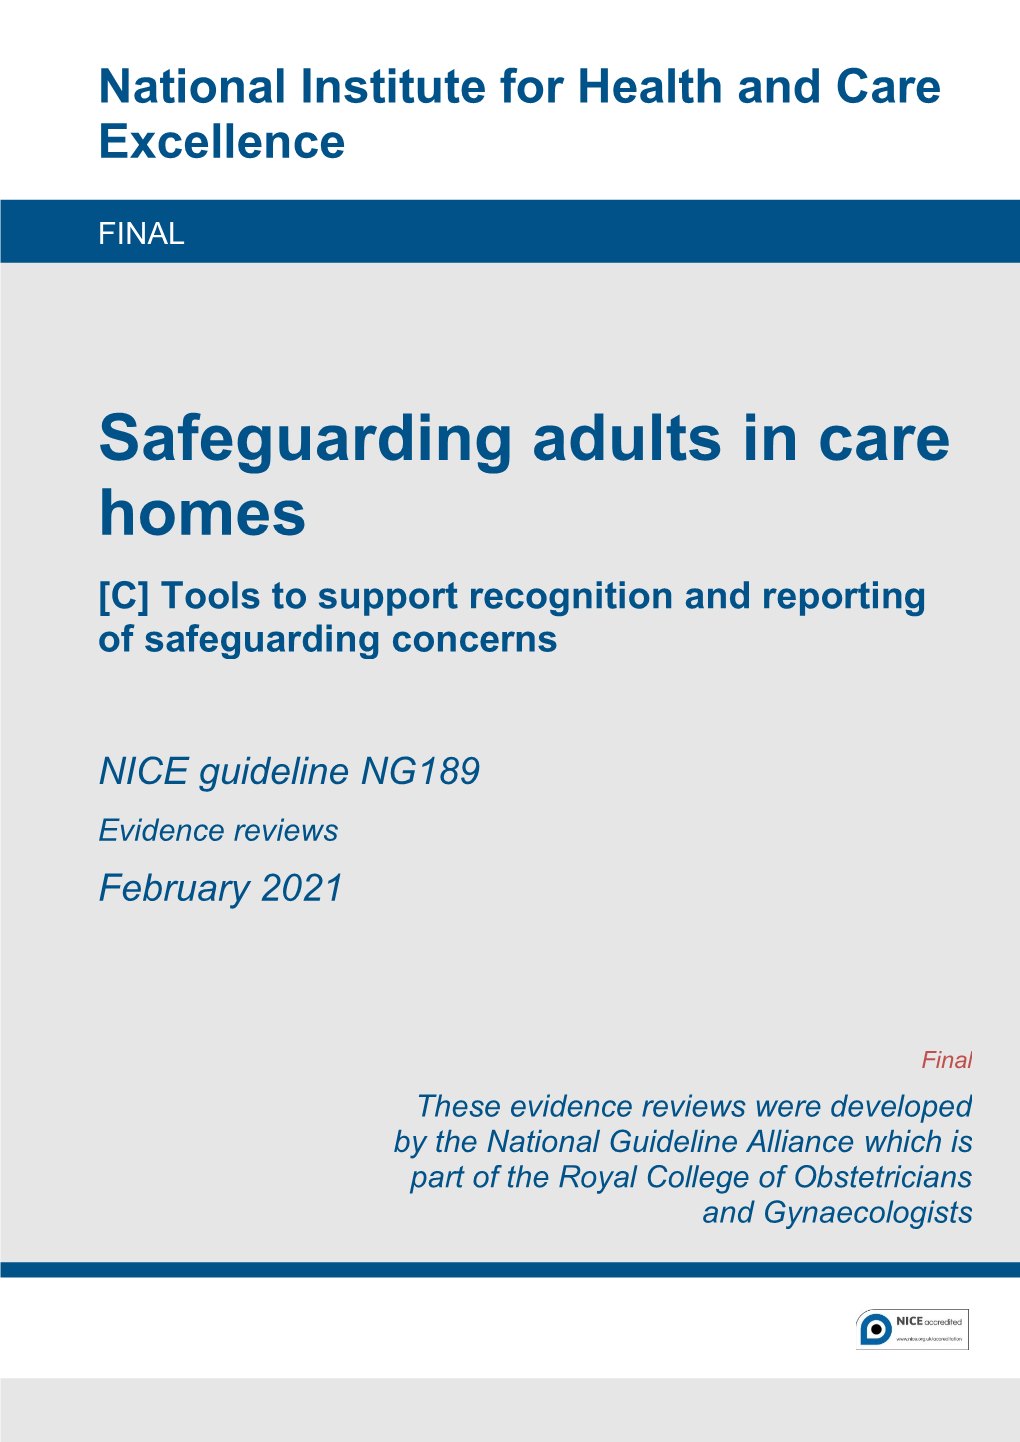 Tools to Support Recognition and Reporting of Safeguarding Concerns